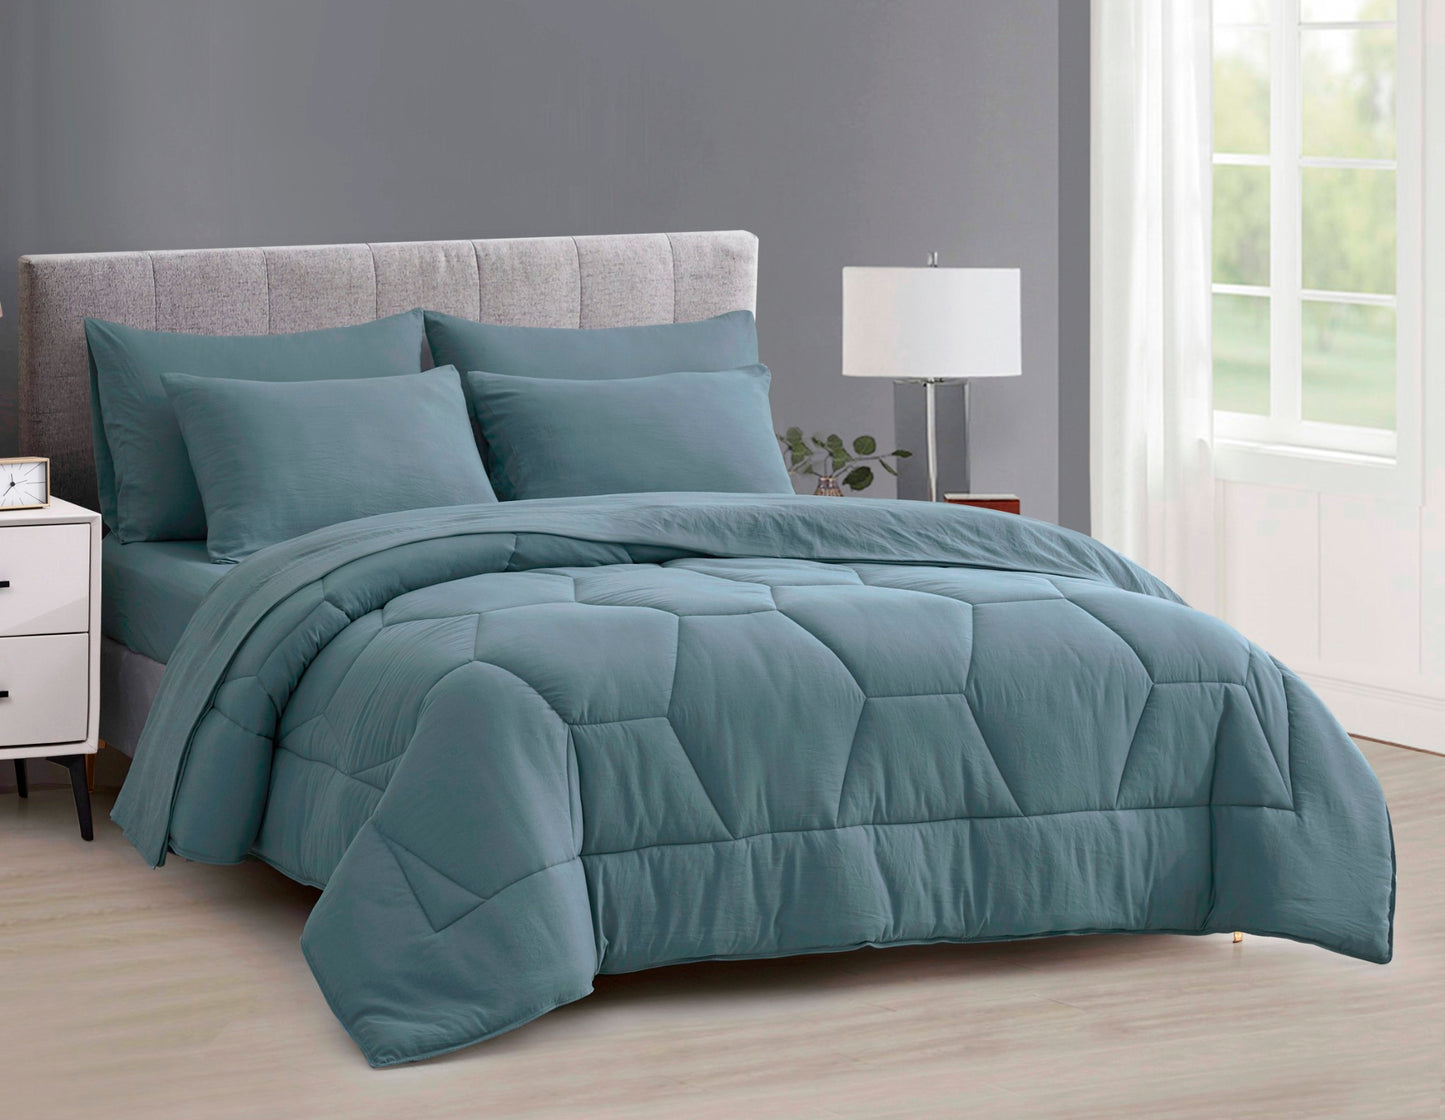 Piper Honeycomb Hexagon Quilted Bed in a Bag Comforter Set